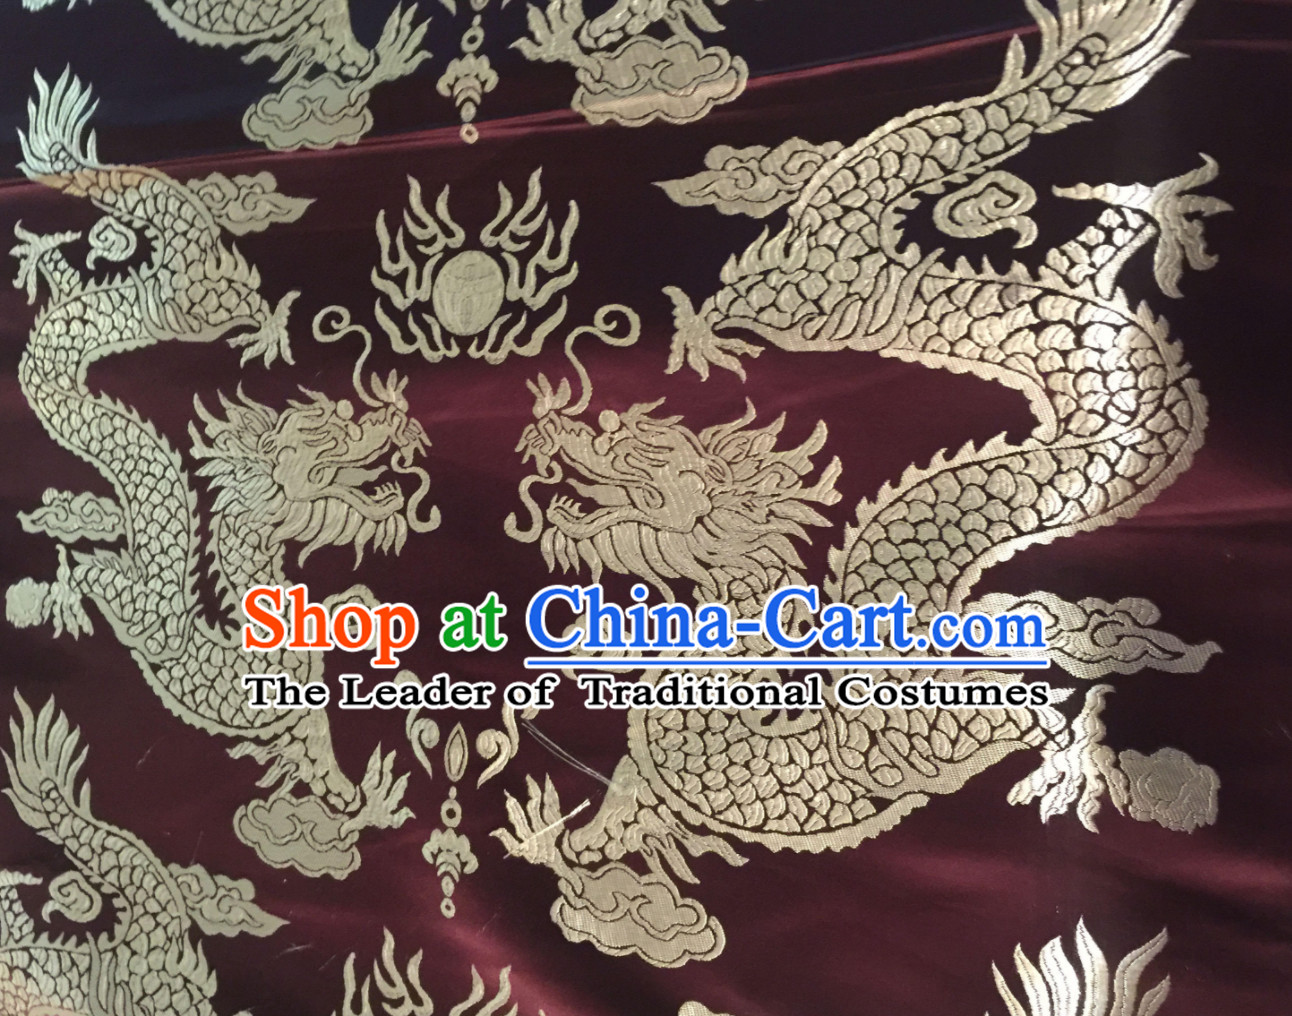 Coffee Asian Chinese Royal Palace Style Traditional Dragon Pattern Design Brocade Fabric Silk Fabric Chinese Fabric Asian Material